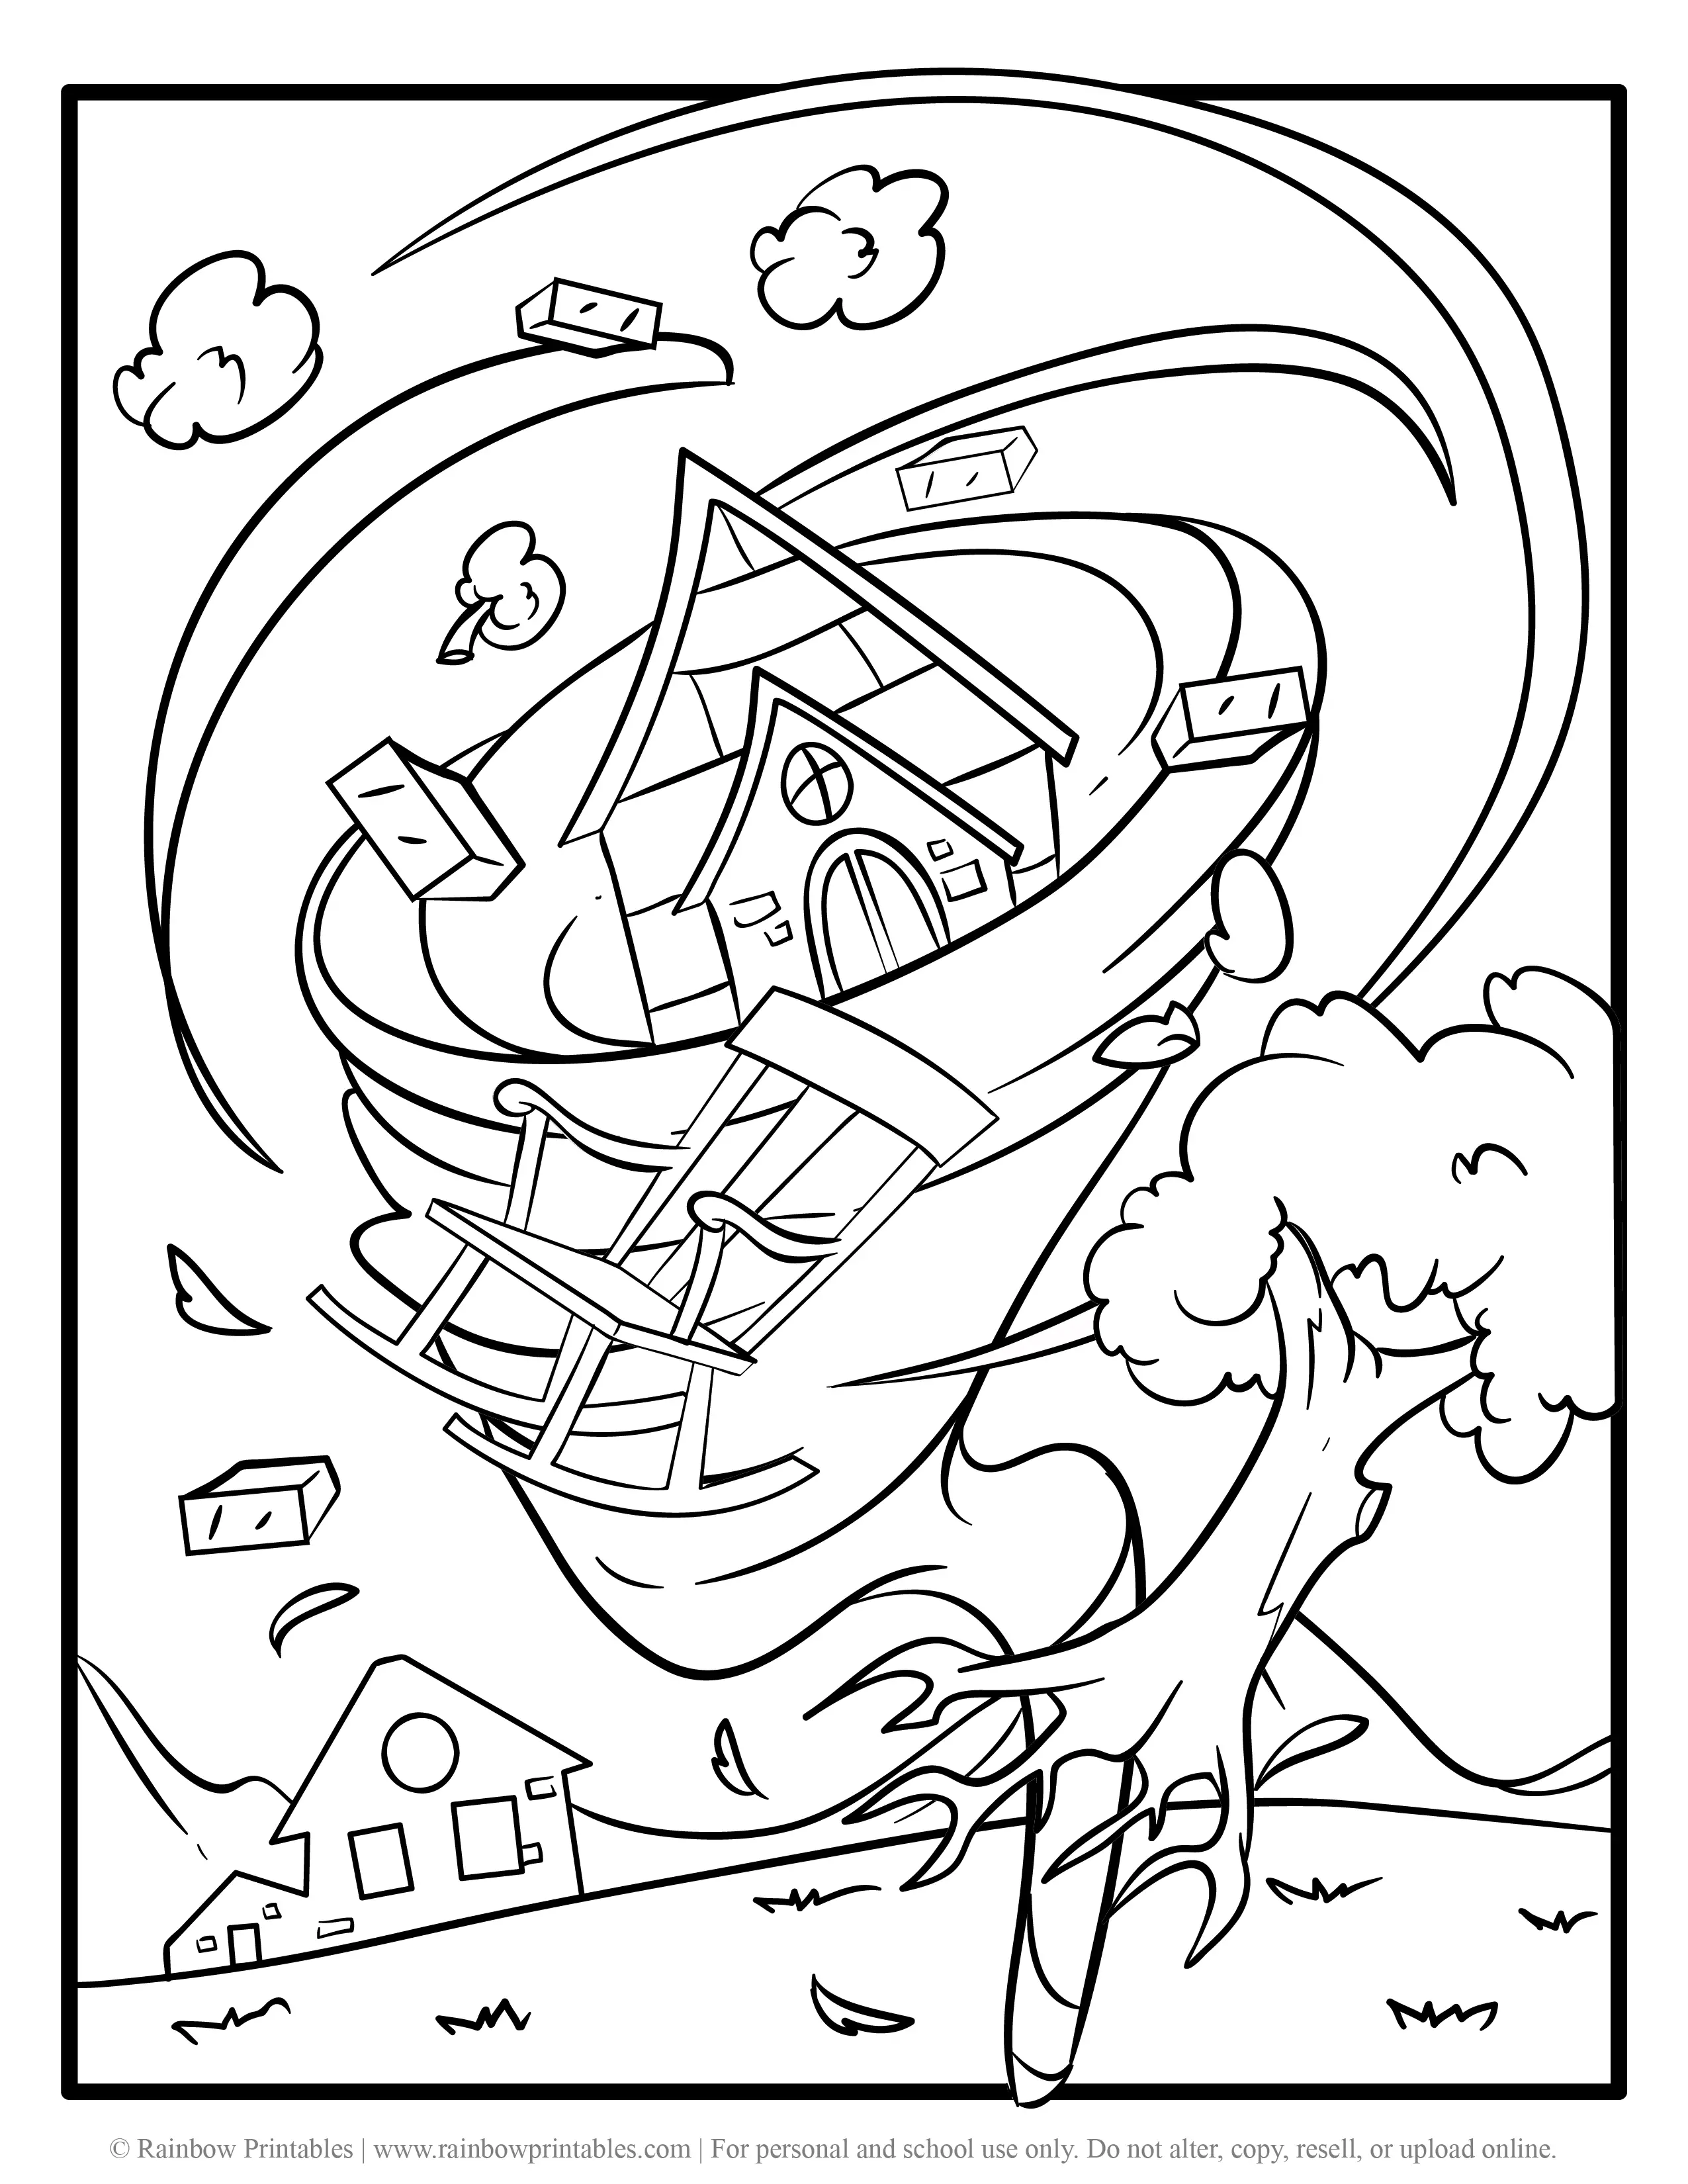 Free Coloring Pages for Kids Drawing Activities Line Art Illustration TORNADO HURRICANE SCENE CHAOS